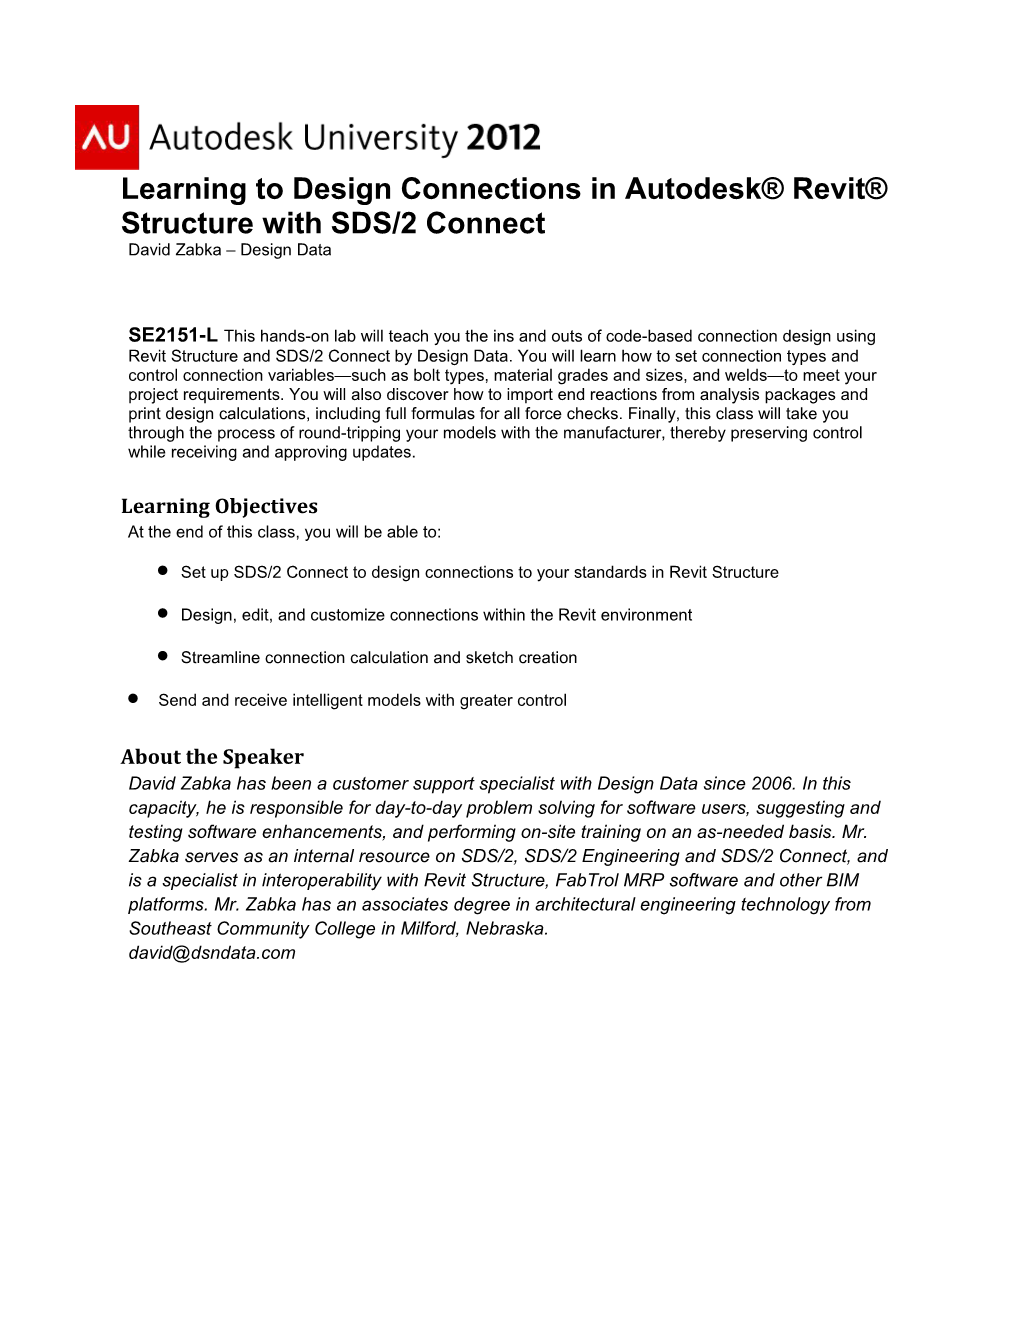 Learning to Design Connections in Autodesk Revit Structure with SDS/2 Connect